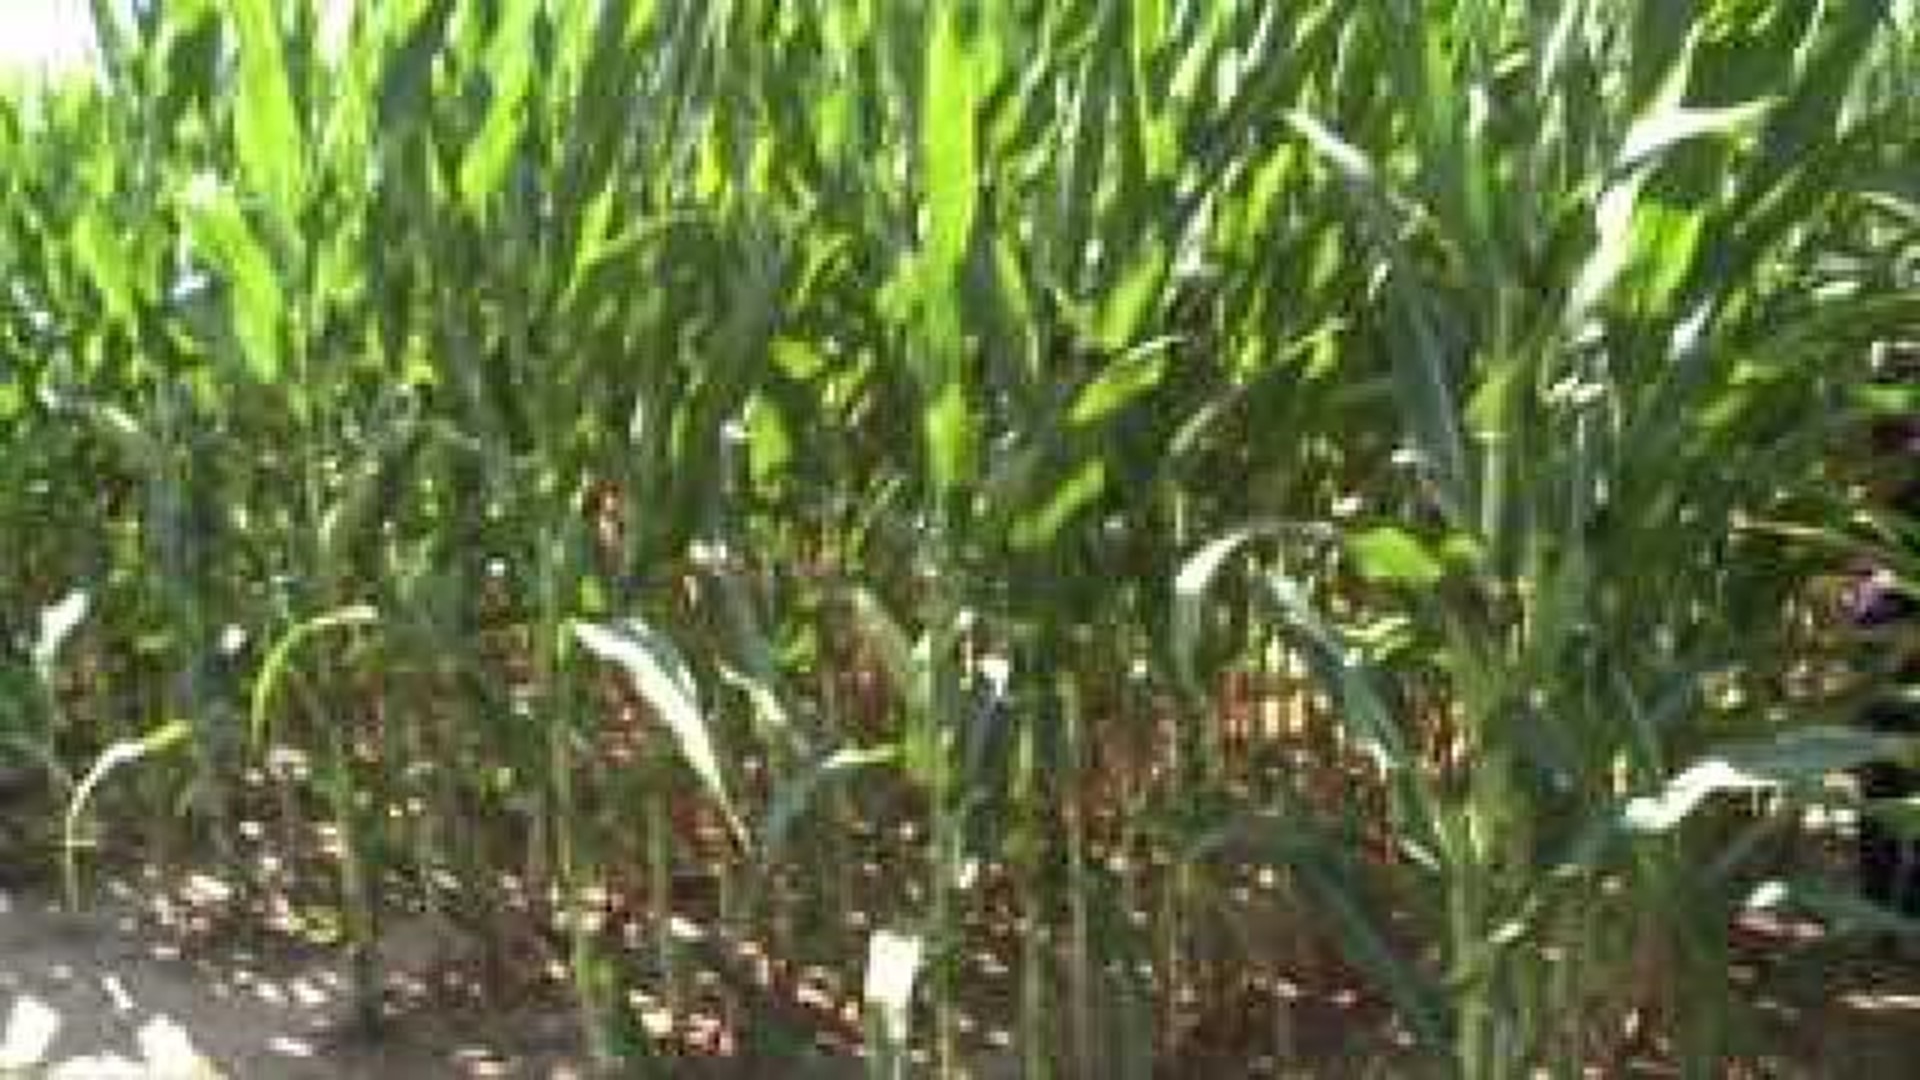 Corn Test Plot Contributes to International Research